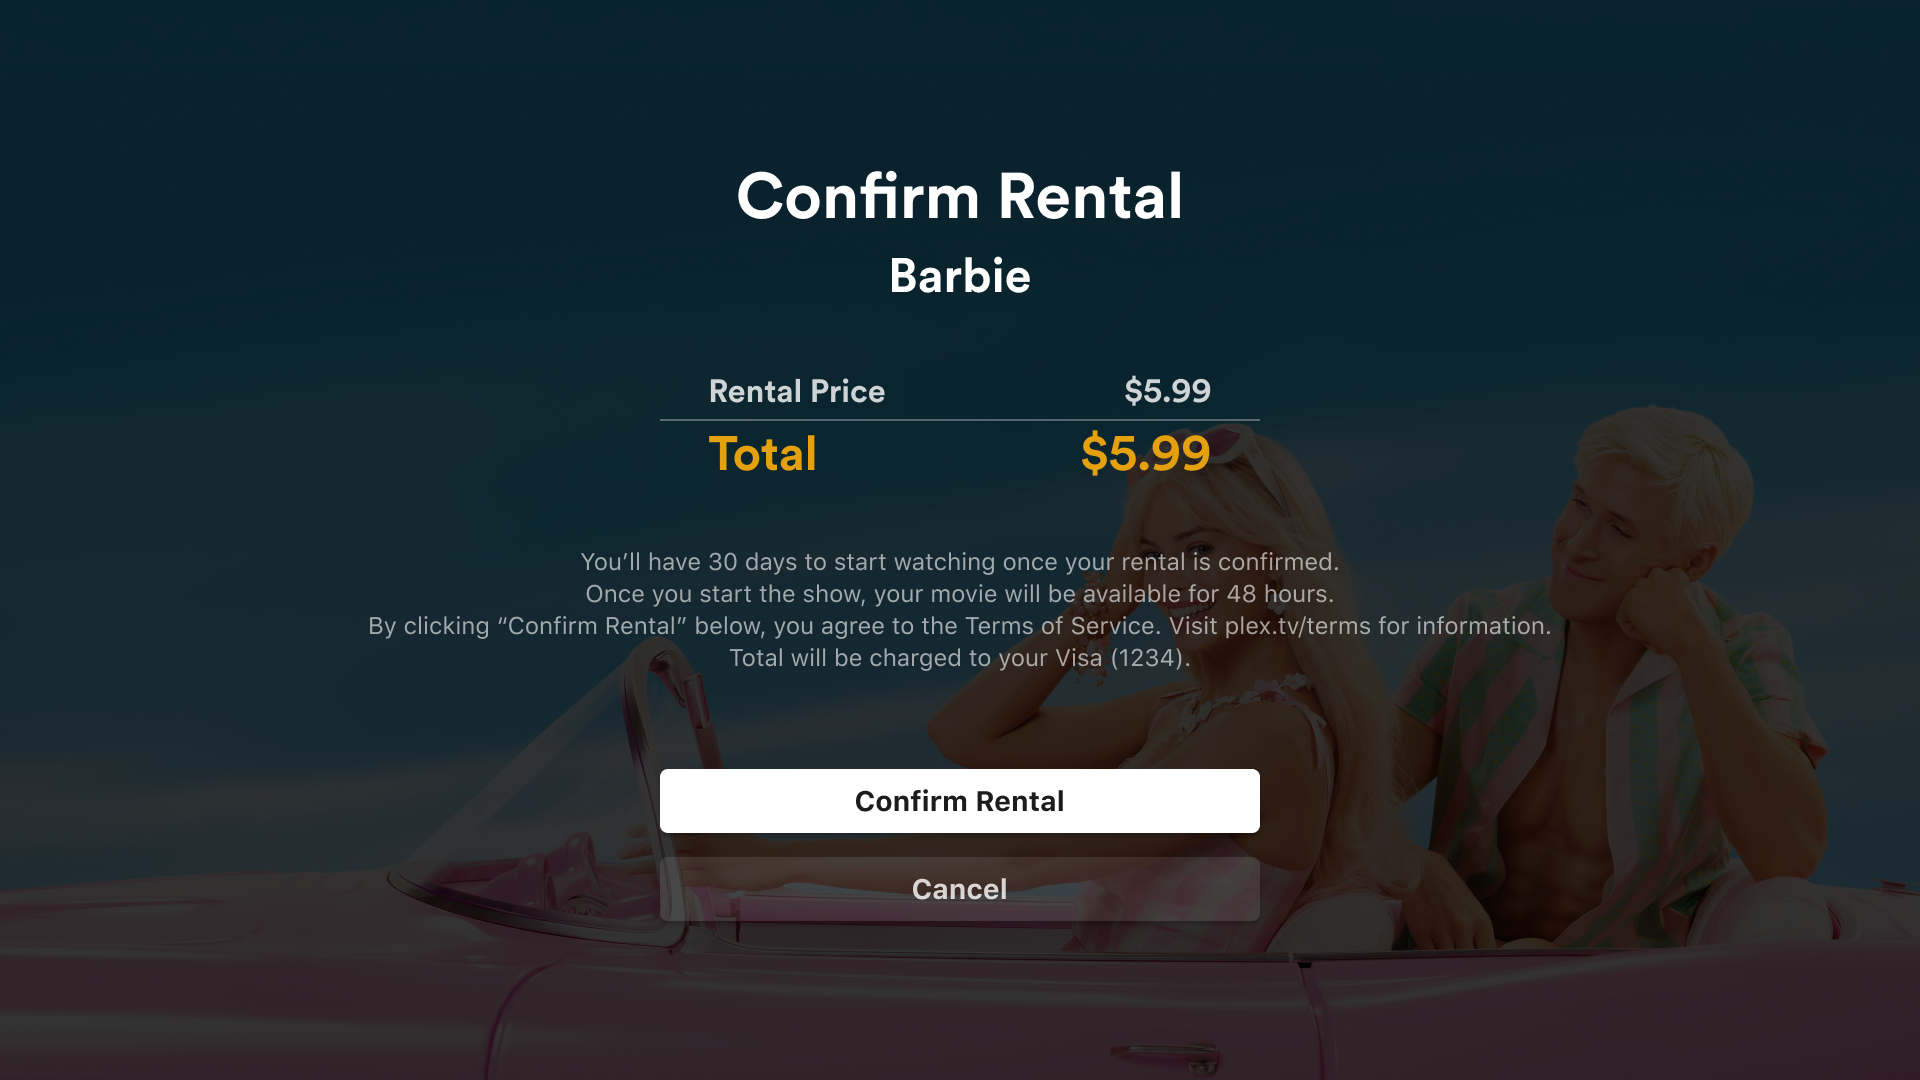 Screen titled Confirm Rental, prompting the user to confirm a rental of the movie Barbie for $5.99 USD. It includes information about how long the rental will be available, that continuing constitutes agreement with various Terms, and offers both Rent and Cancel buttons.